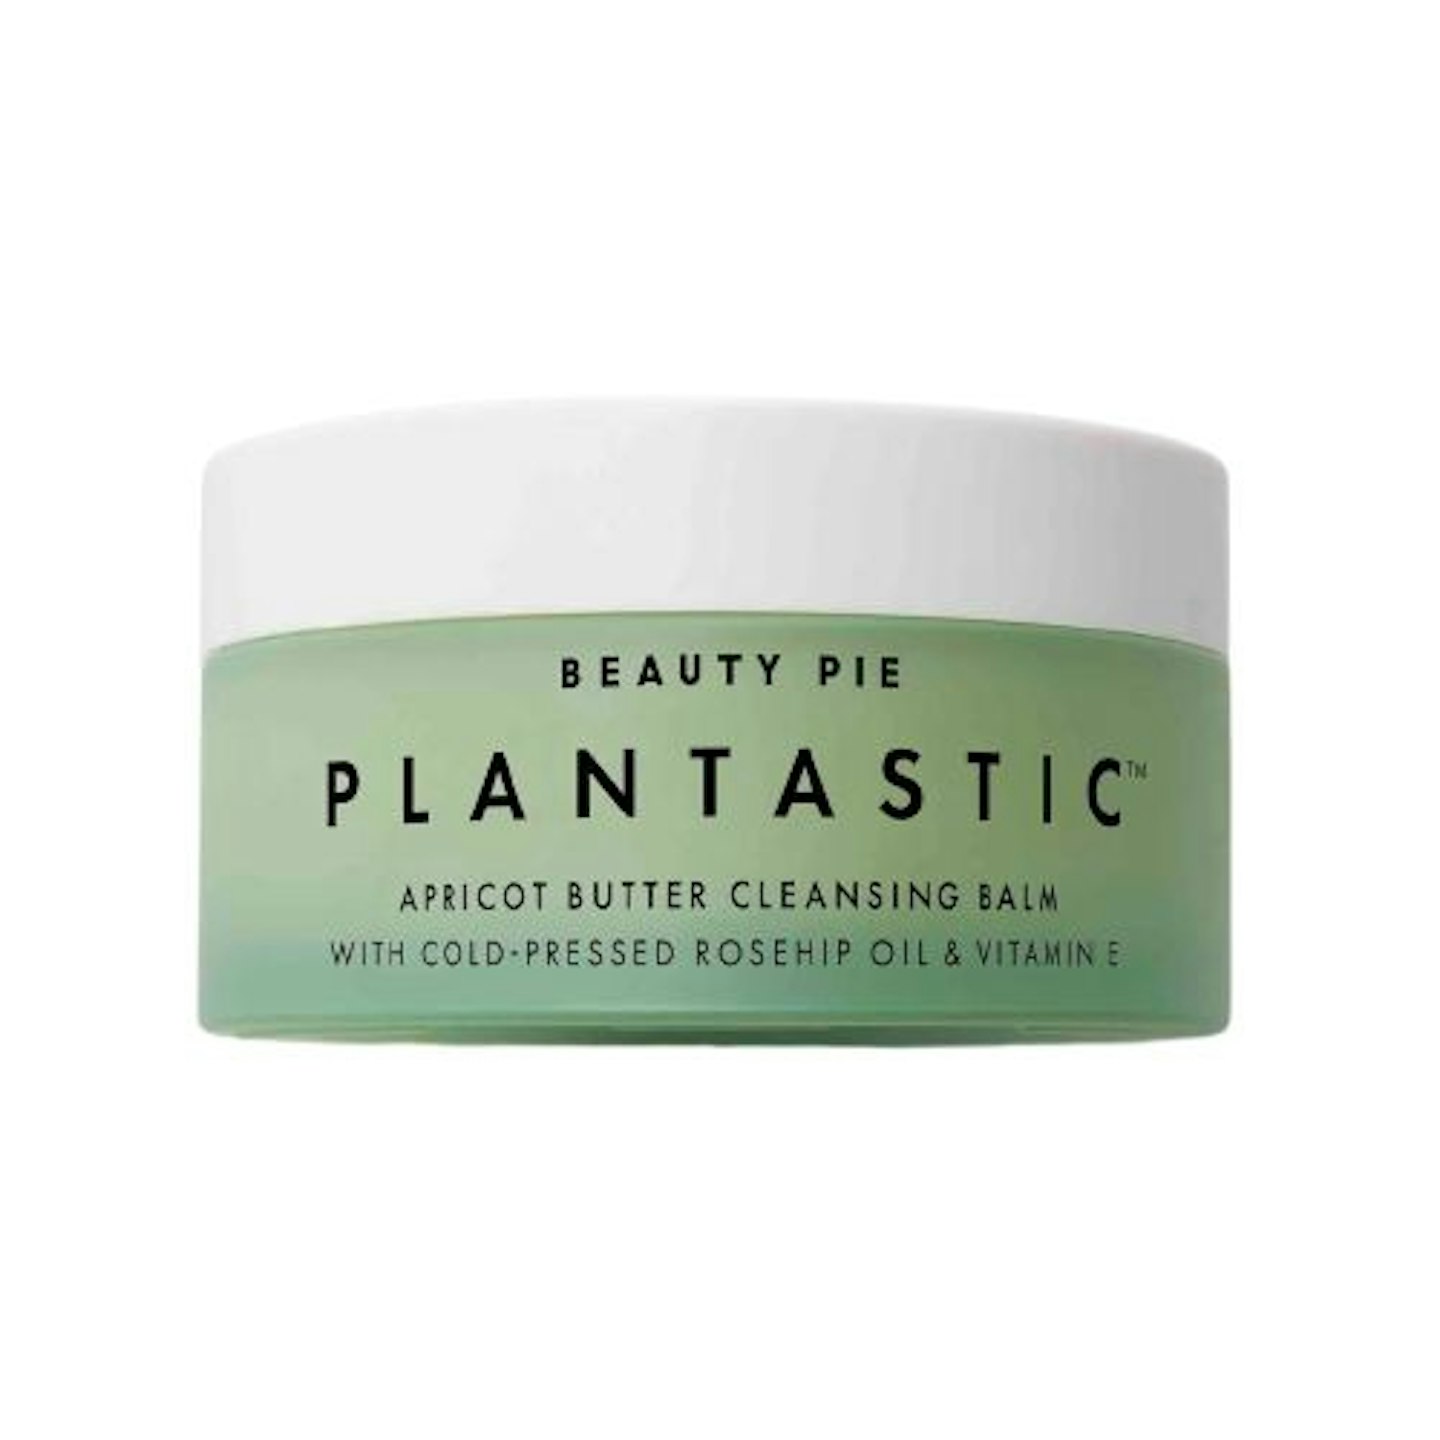 Beauty Pie Plantastic Apricot Butter Cleansing Balm